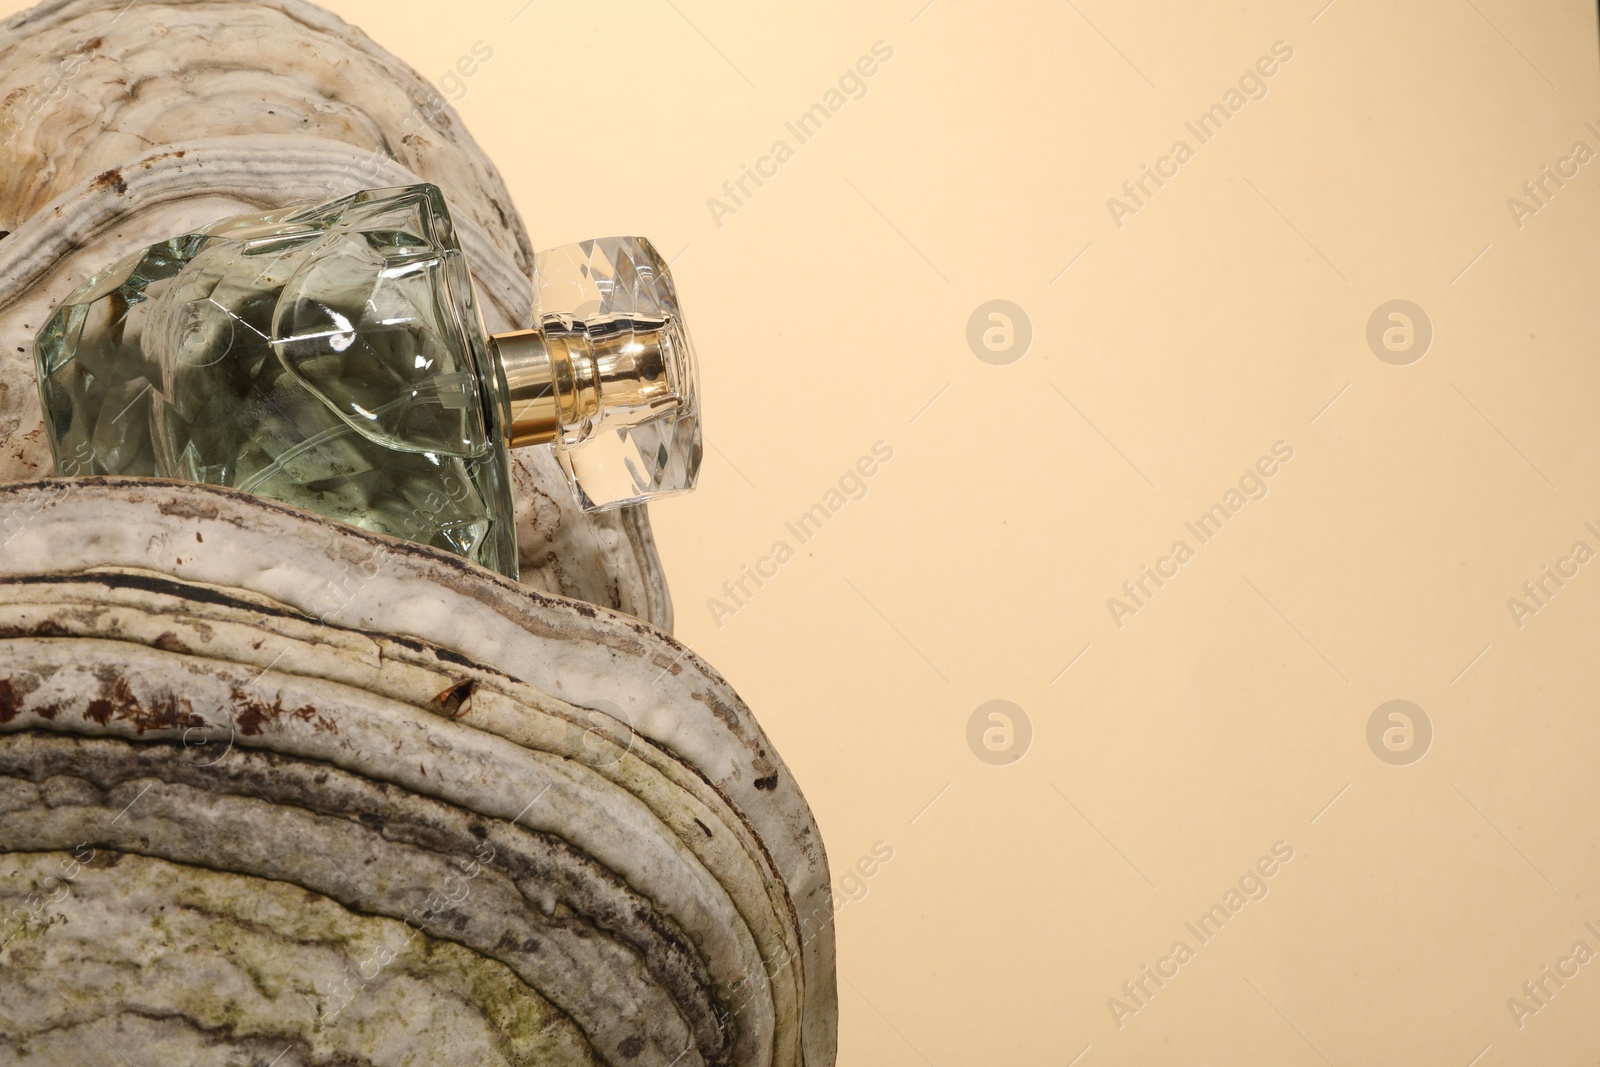 Photo of Luxury perfume in bottle on textured surface against beige background, space for text